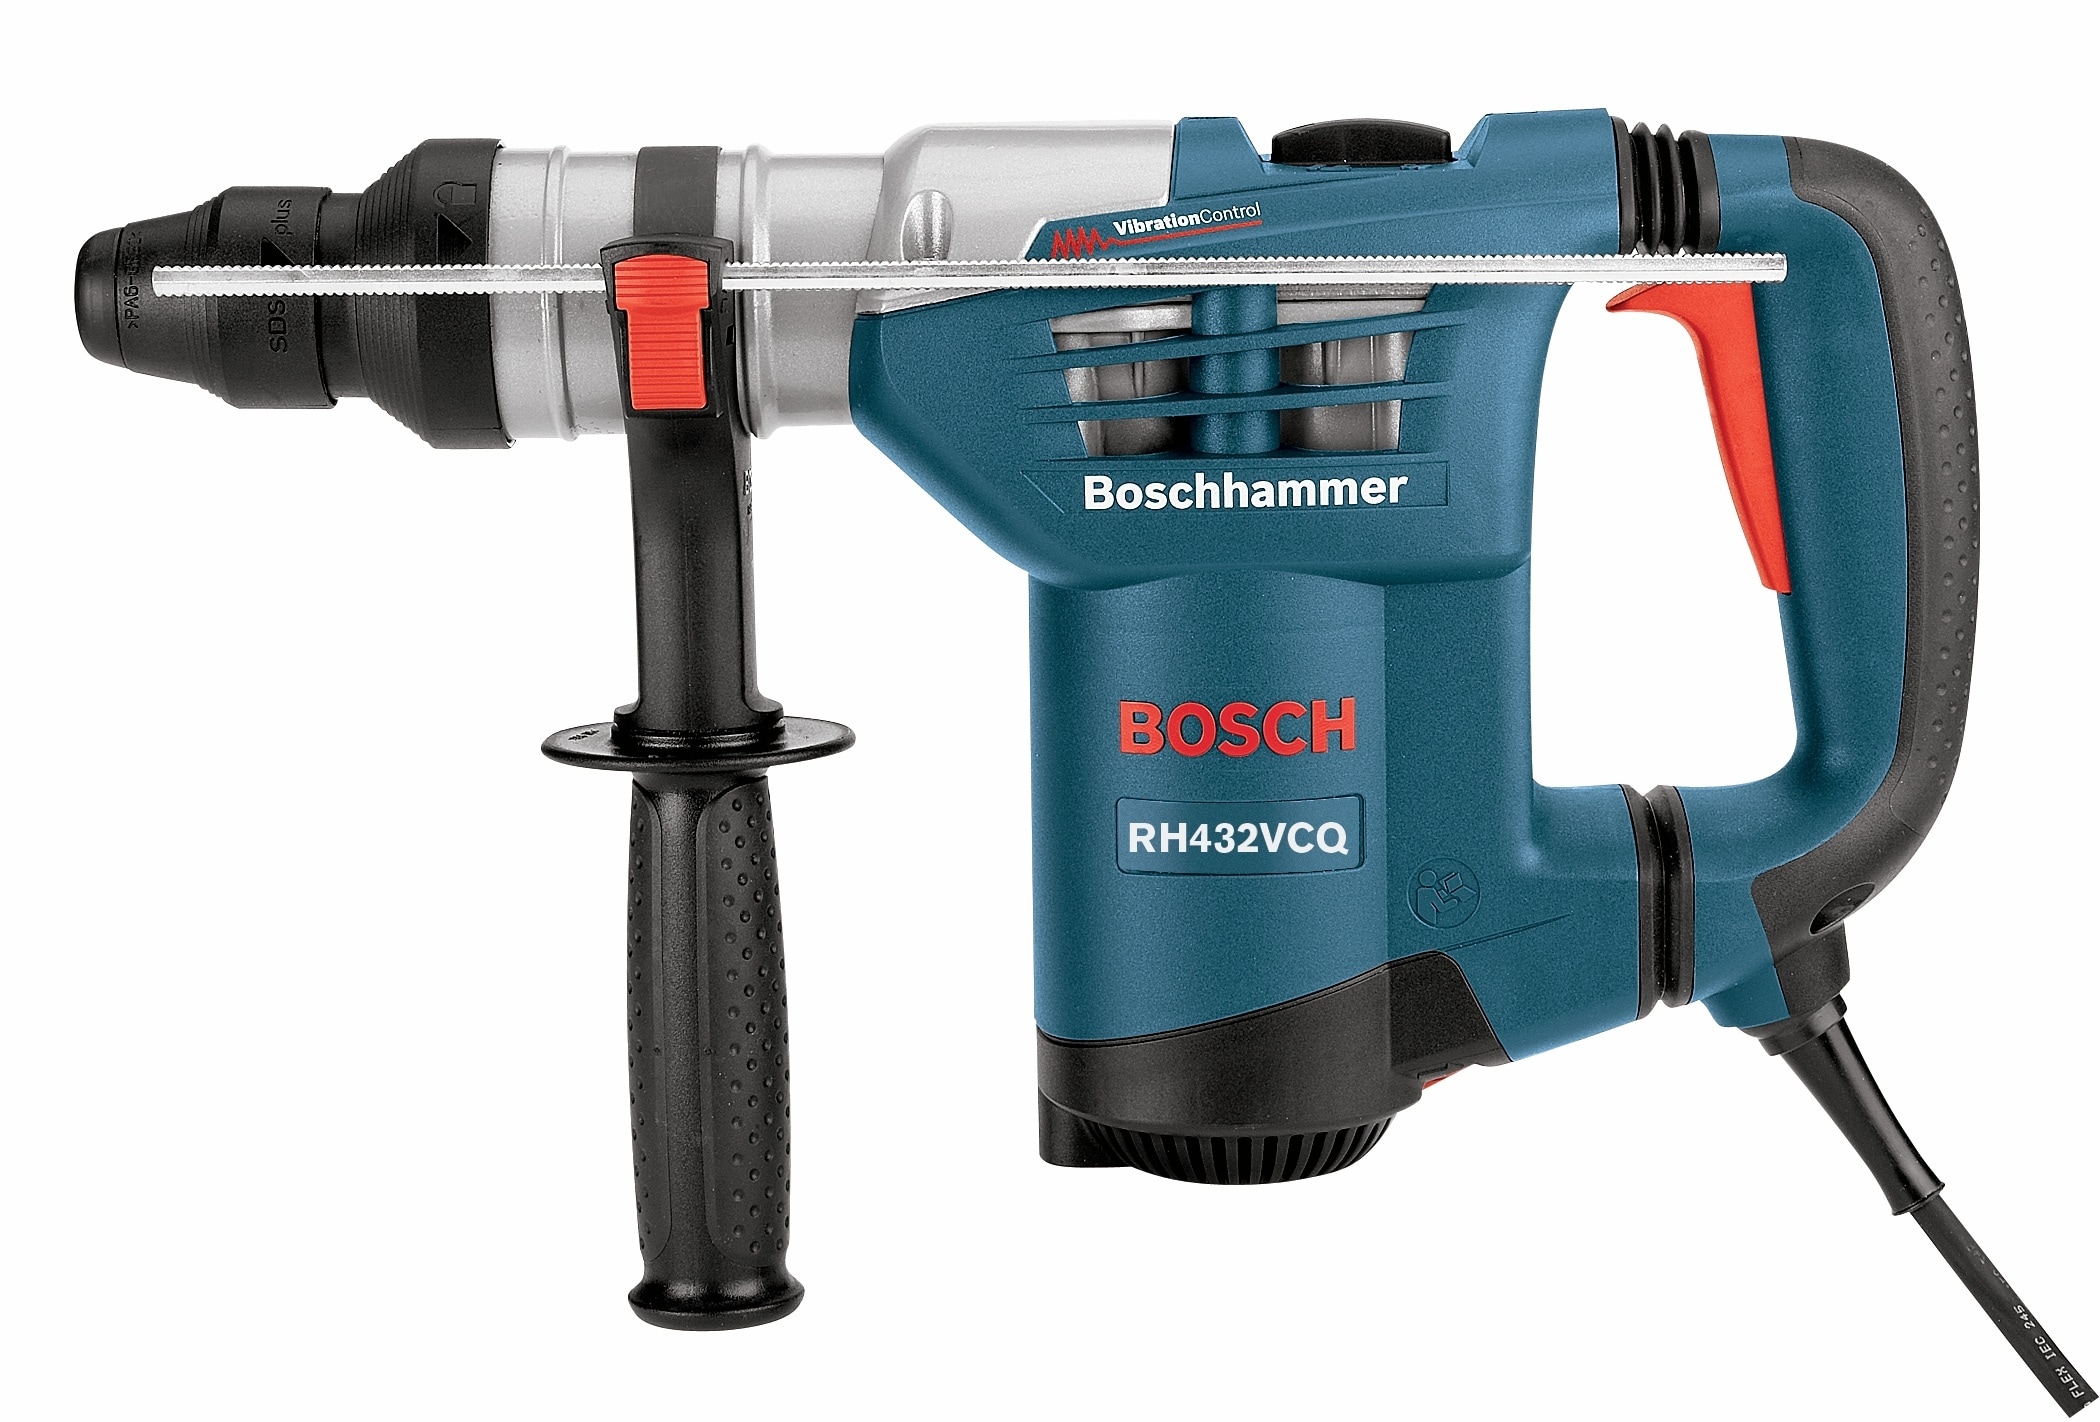 Bosch 8.5-Amp 3/4-in Sds-plus Variable Speed Corded Rotary Hammer Drill ...